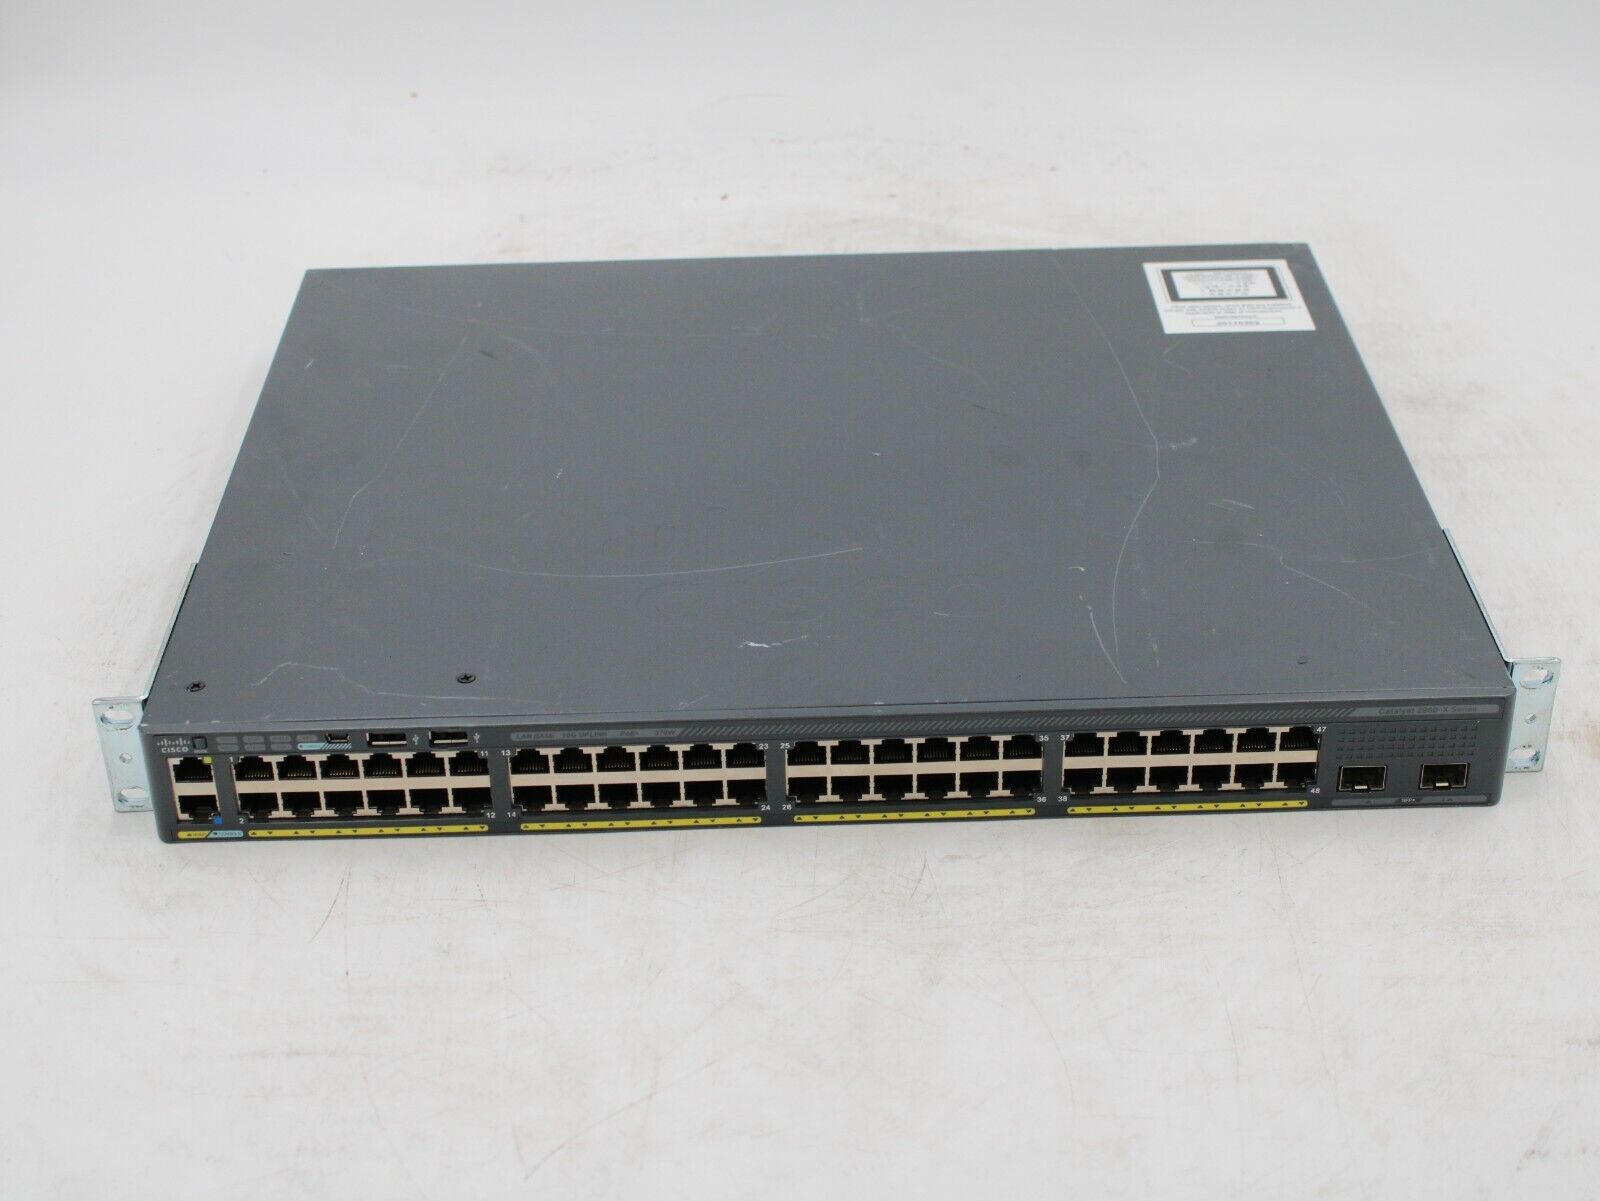 Cisco Catalyst 2960-X WS-C2960X-48LPD-L 48 Port GigE PoE Network Switch TESTED